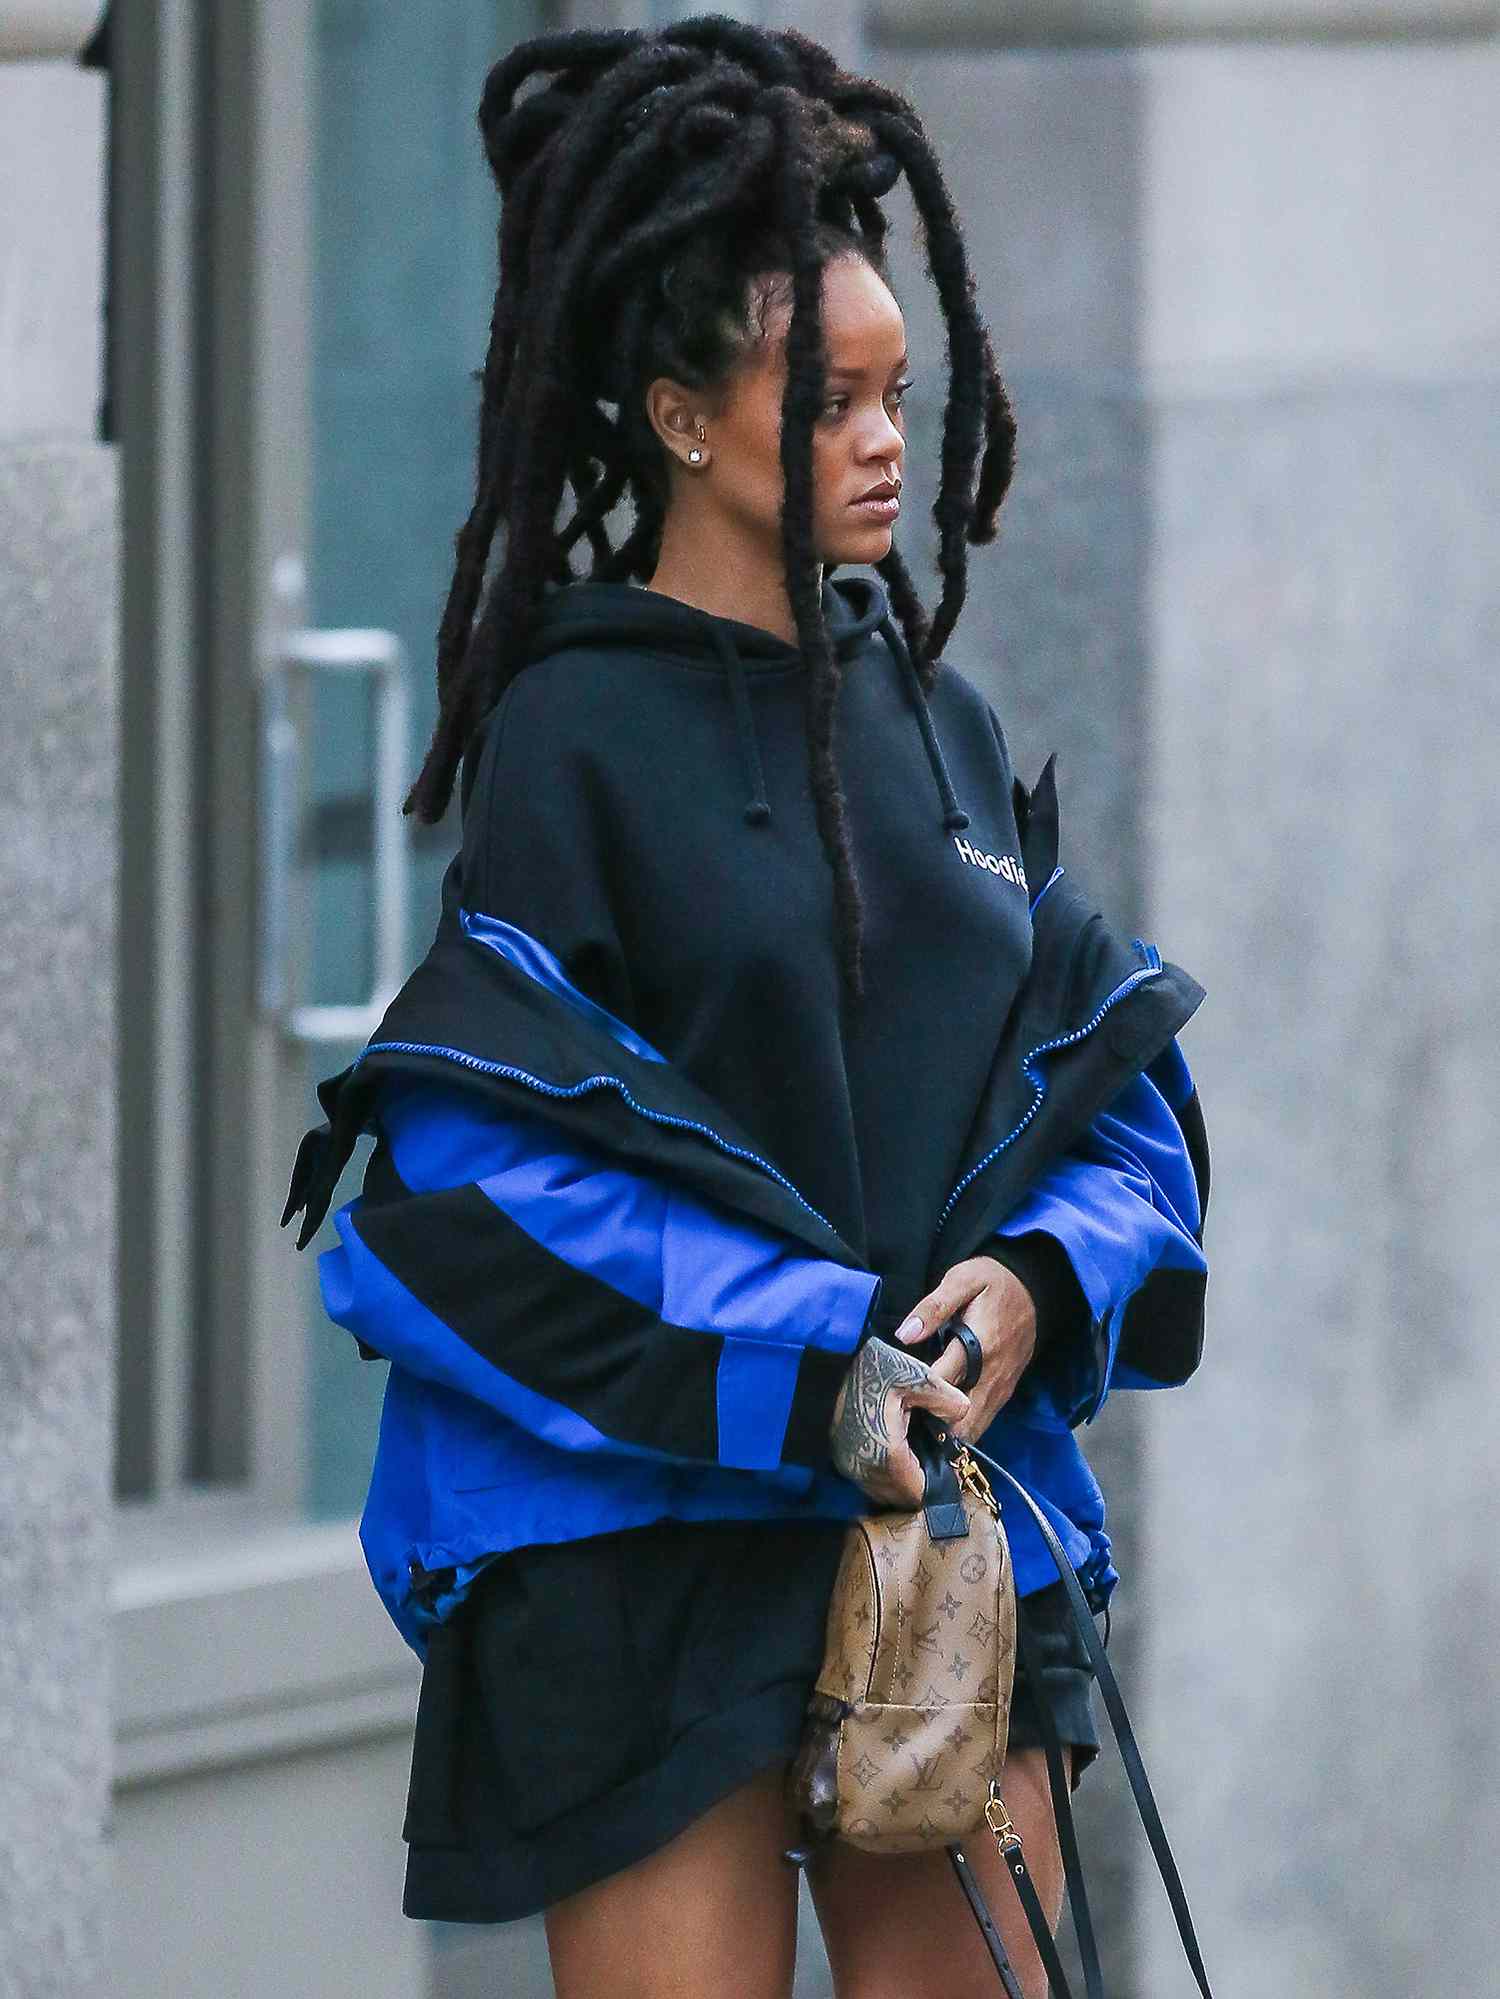 Rihanna steps out in a $5,000+ street style look